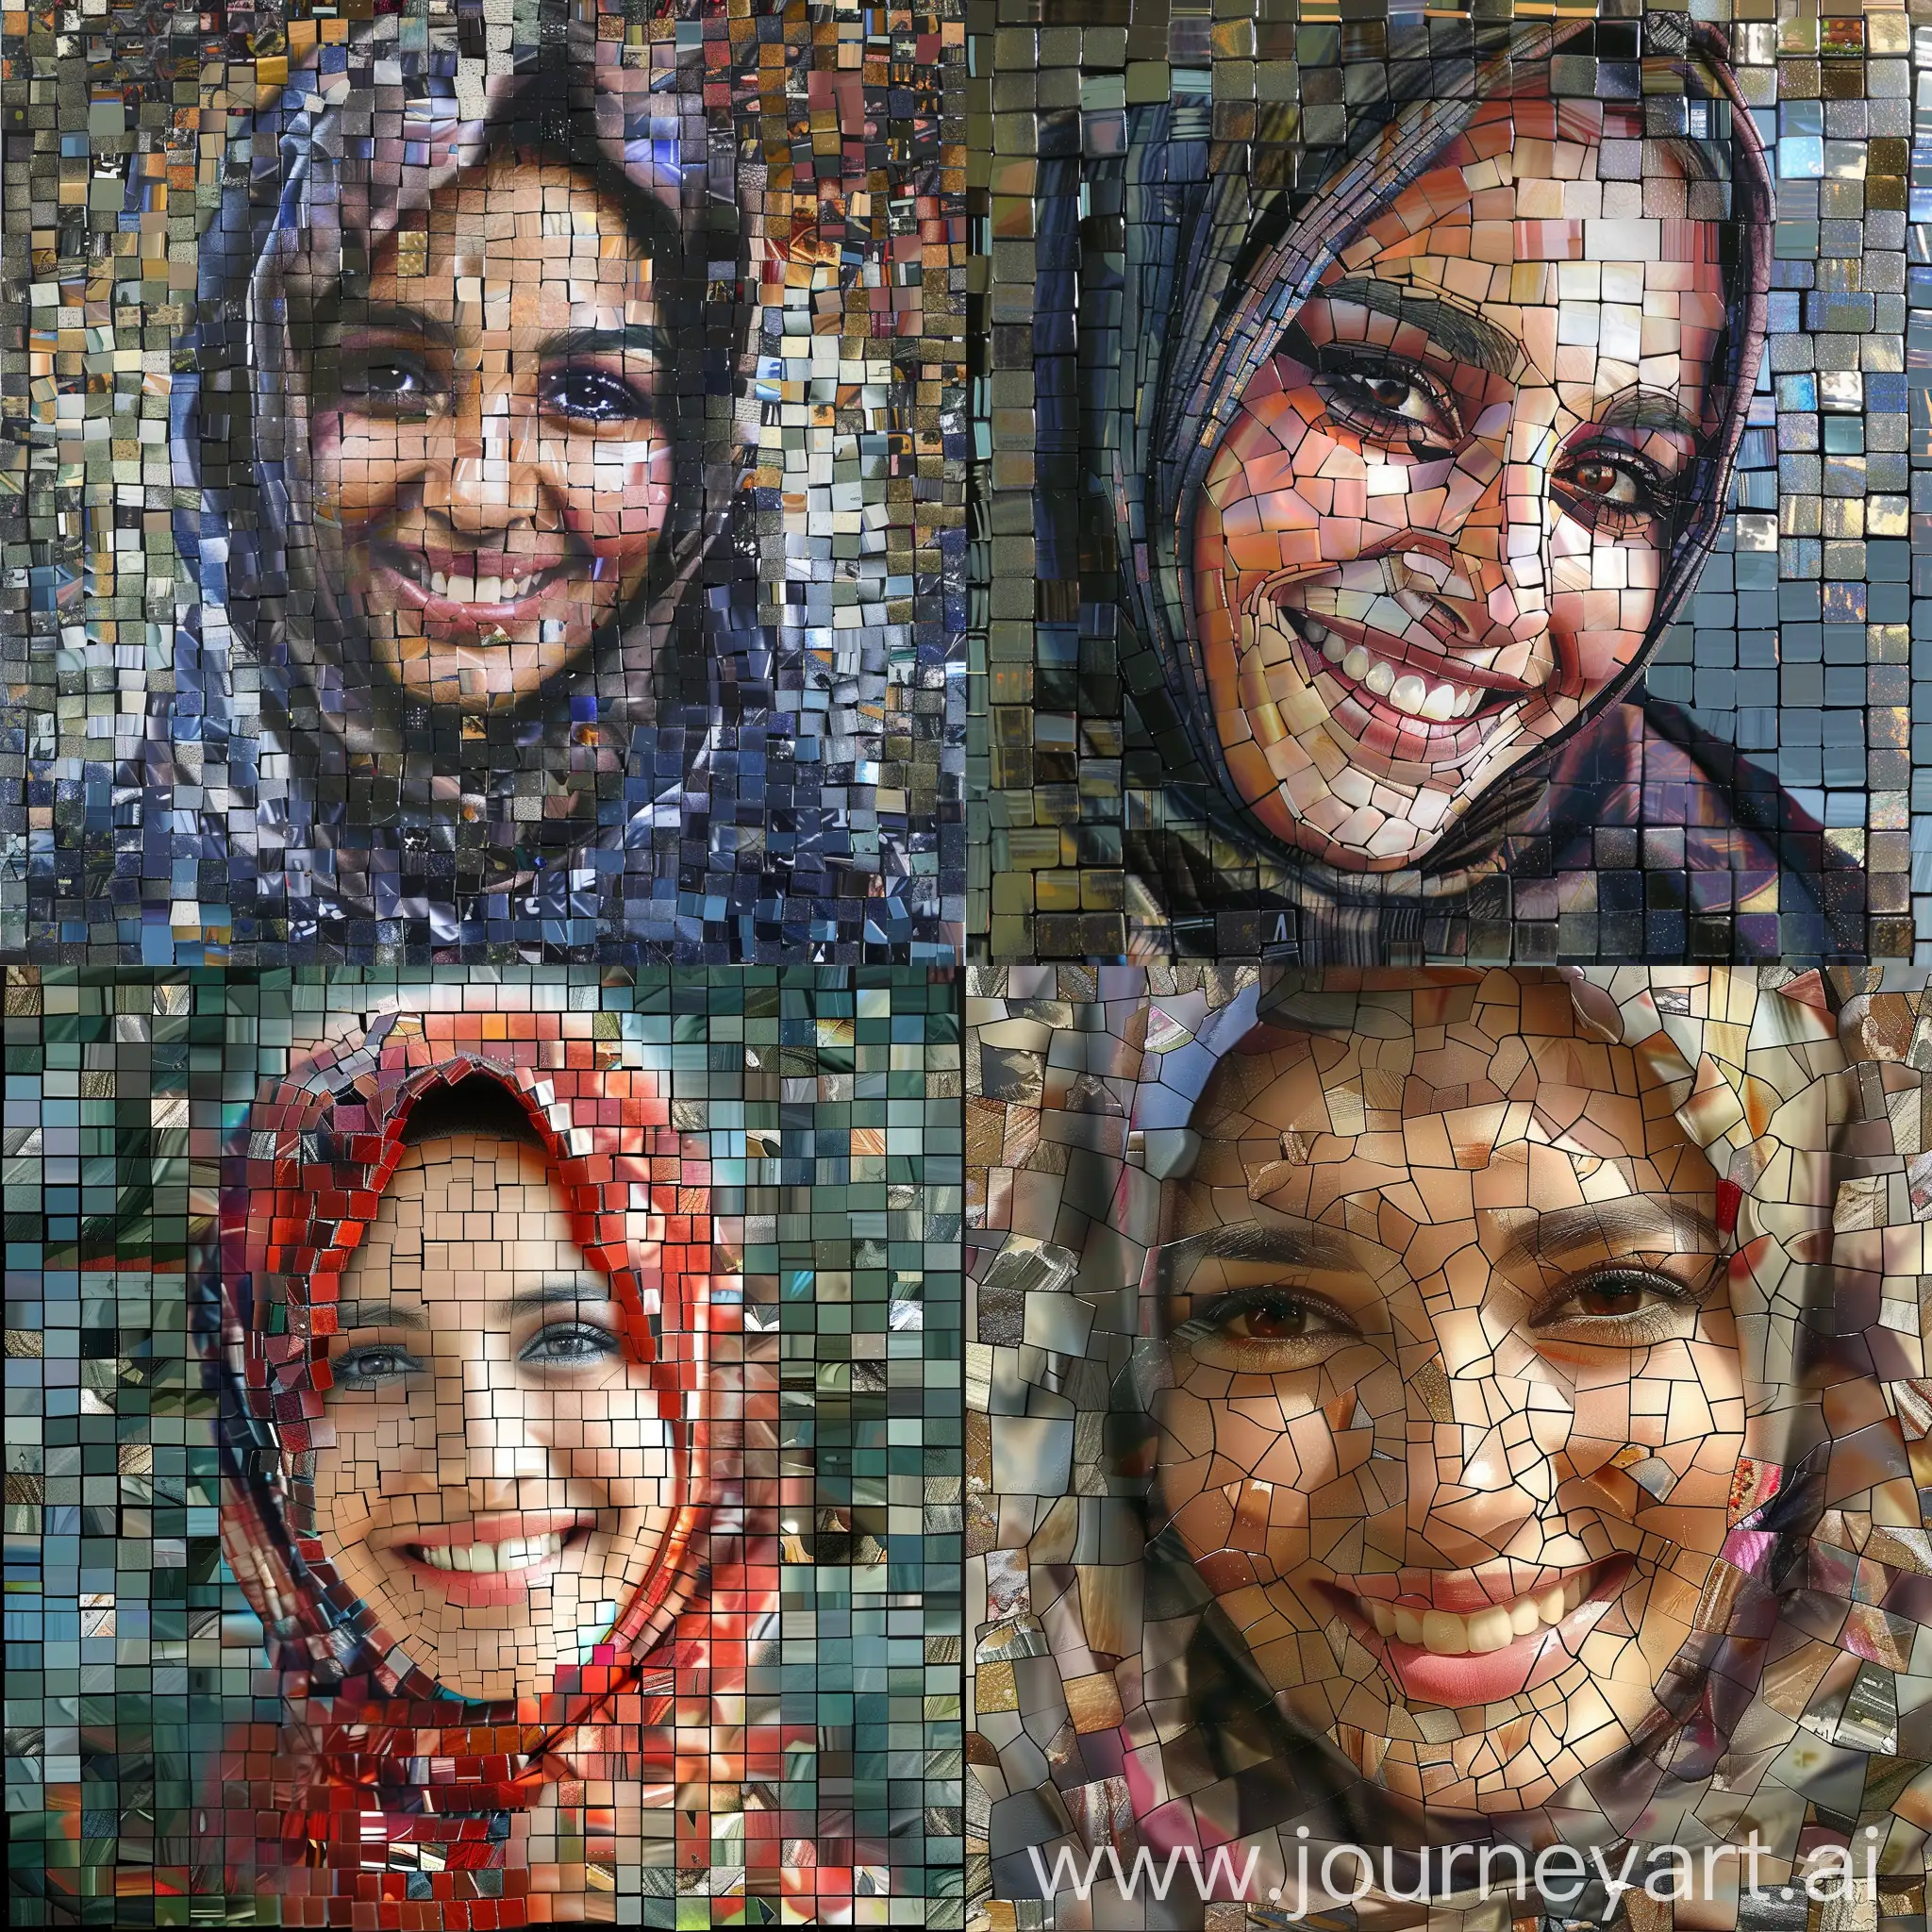 images in a grid pattern to form a larger, more coherent picture. The parts that are visible show the face, the beautiful woman wearing the hijab is smiling. This mosaic technique creates an interesting visual effect by combining fragments that are only revealed as a complete subject